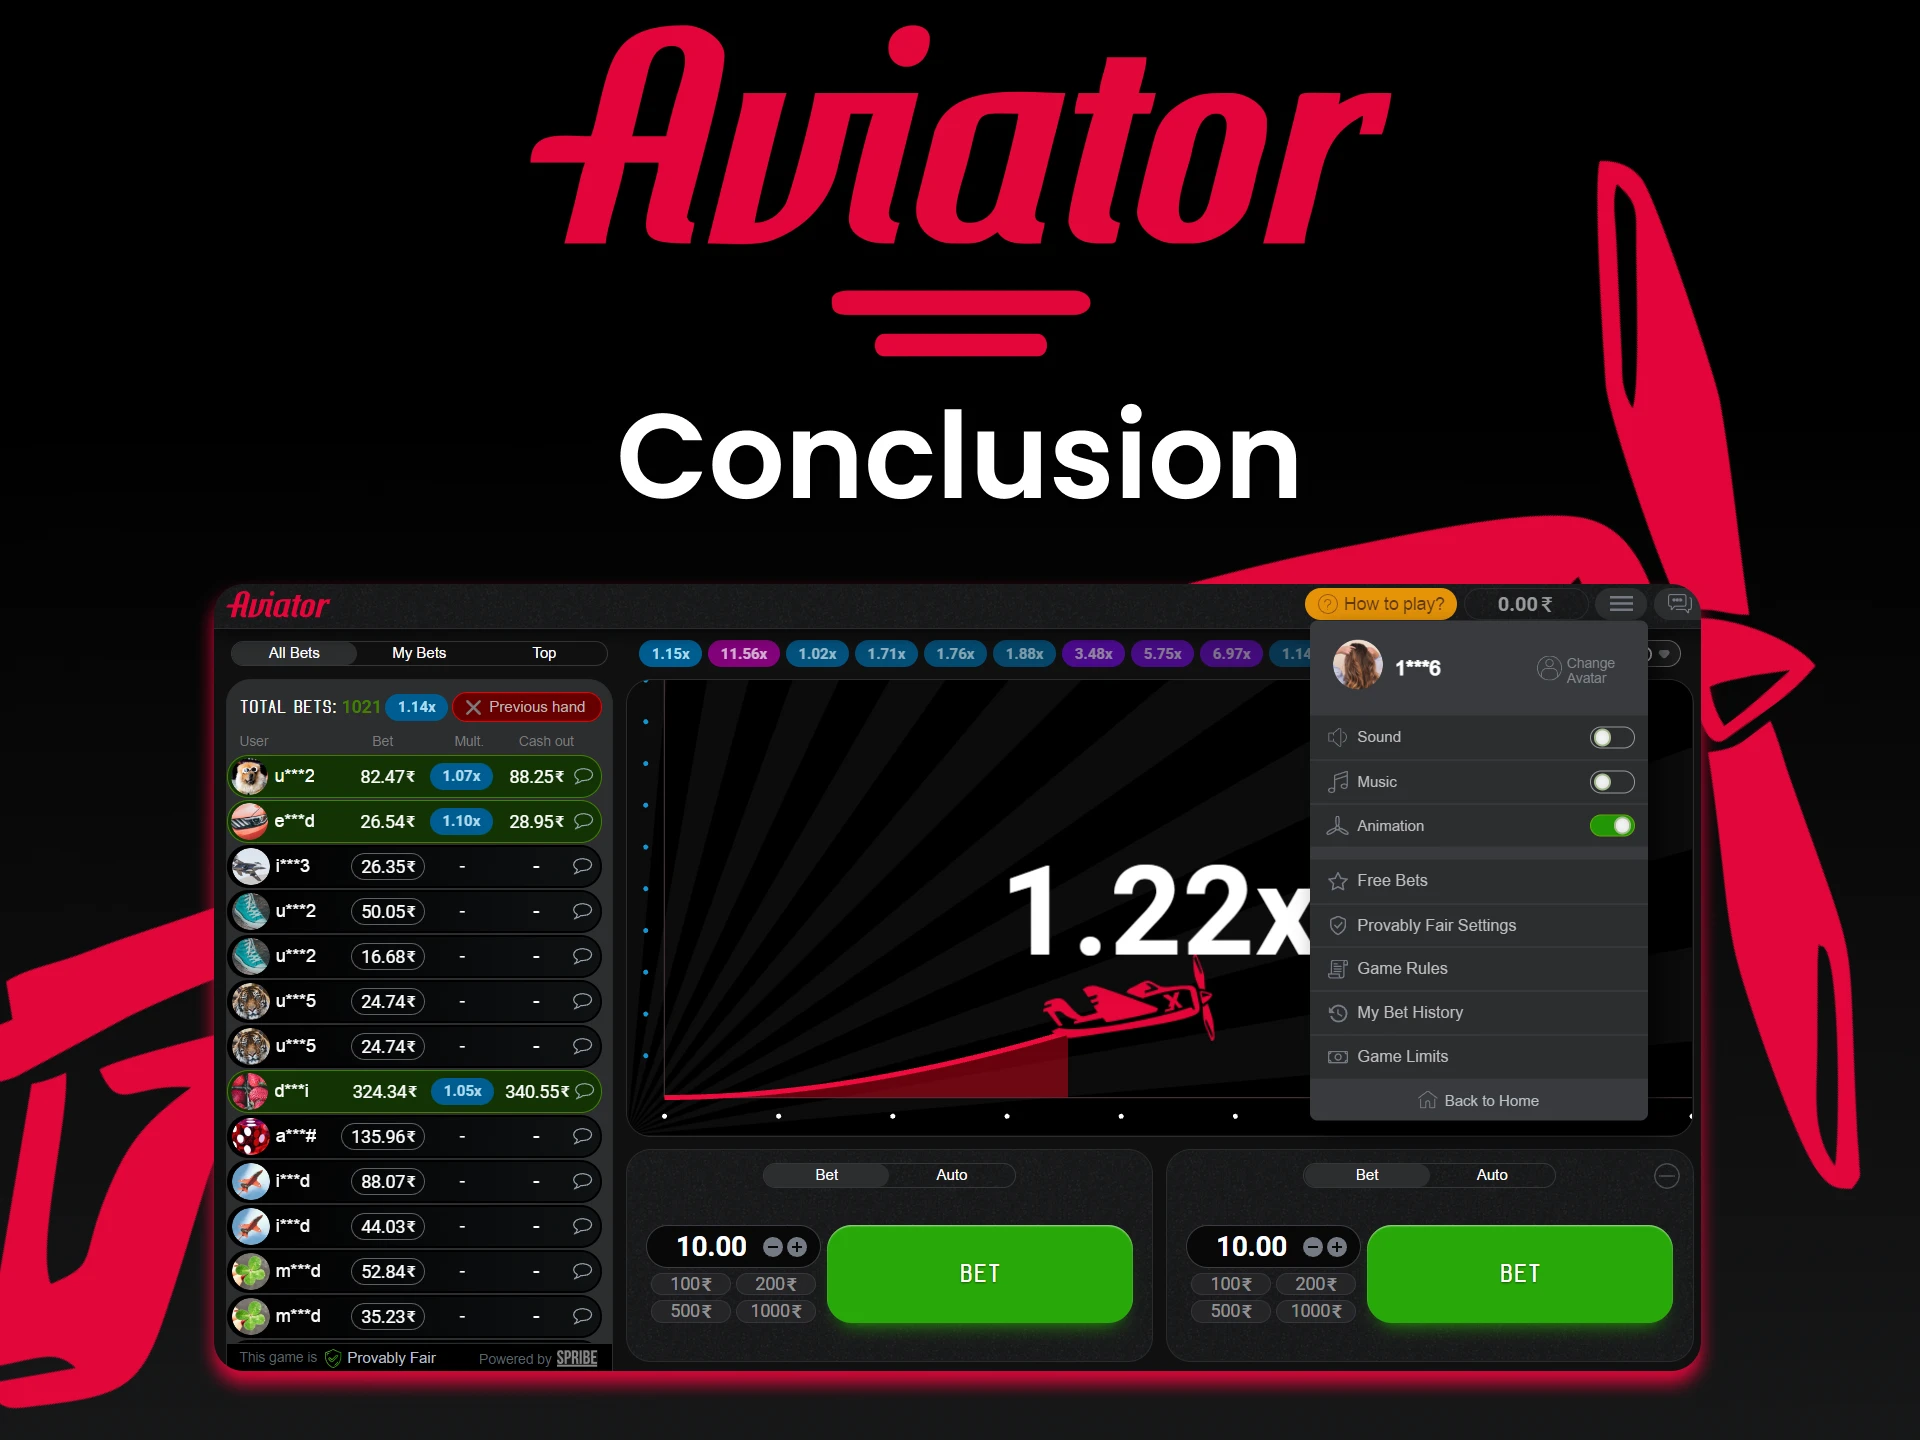 Aviator is one of the most exciting betting games.